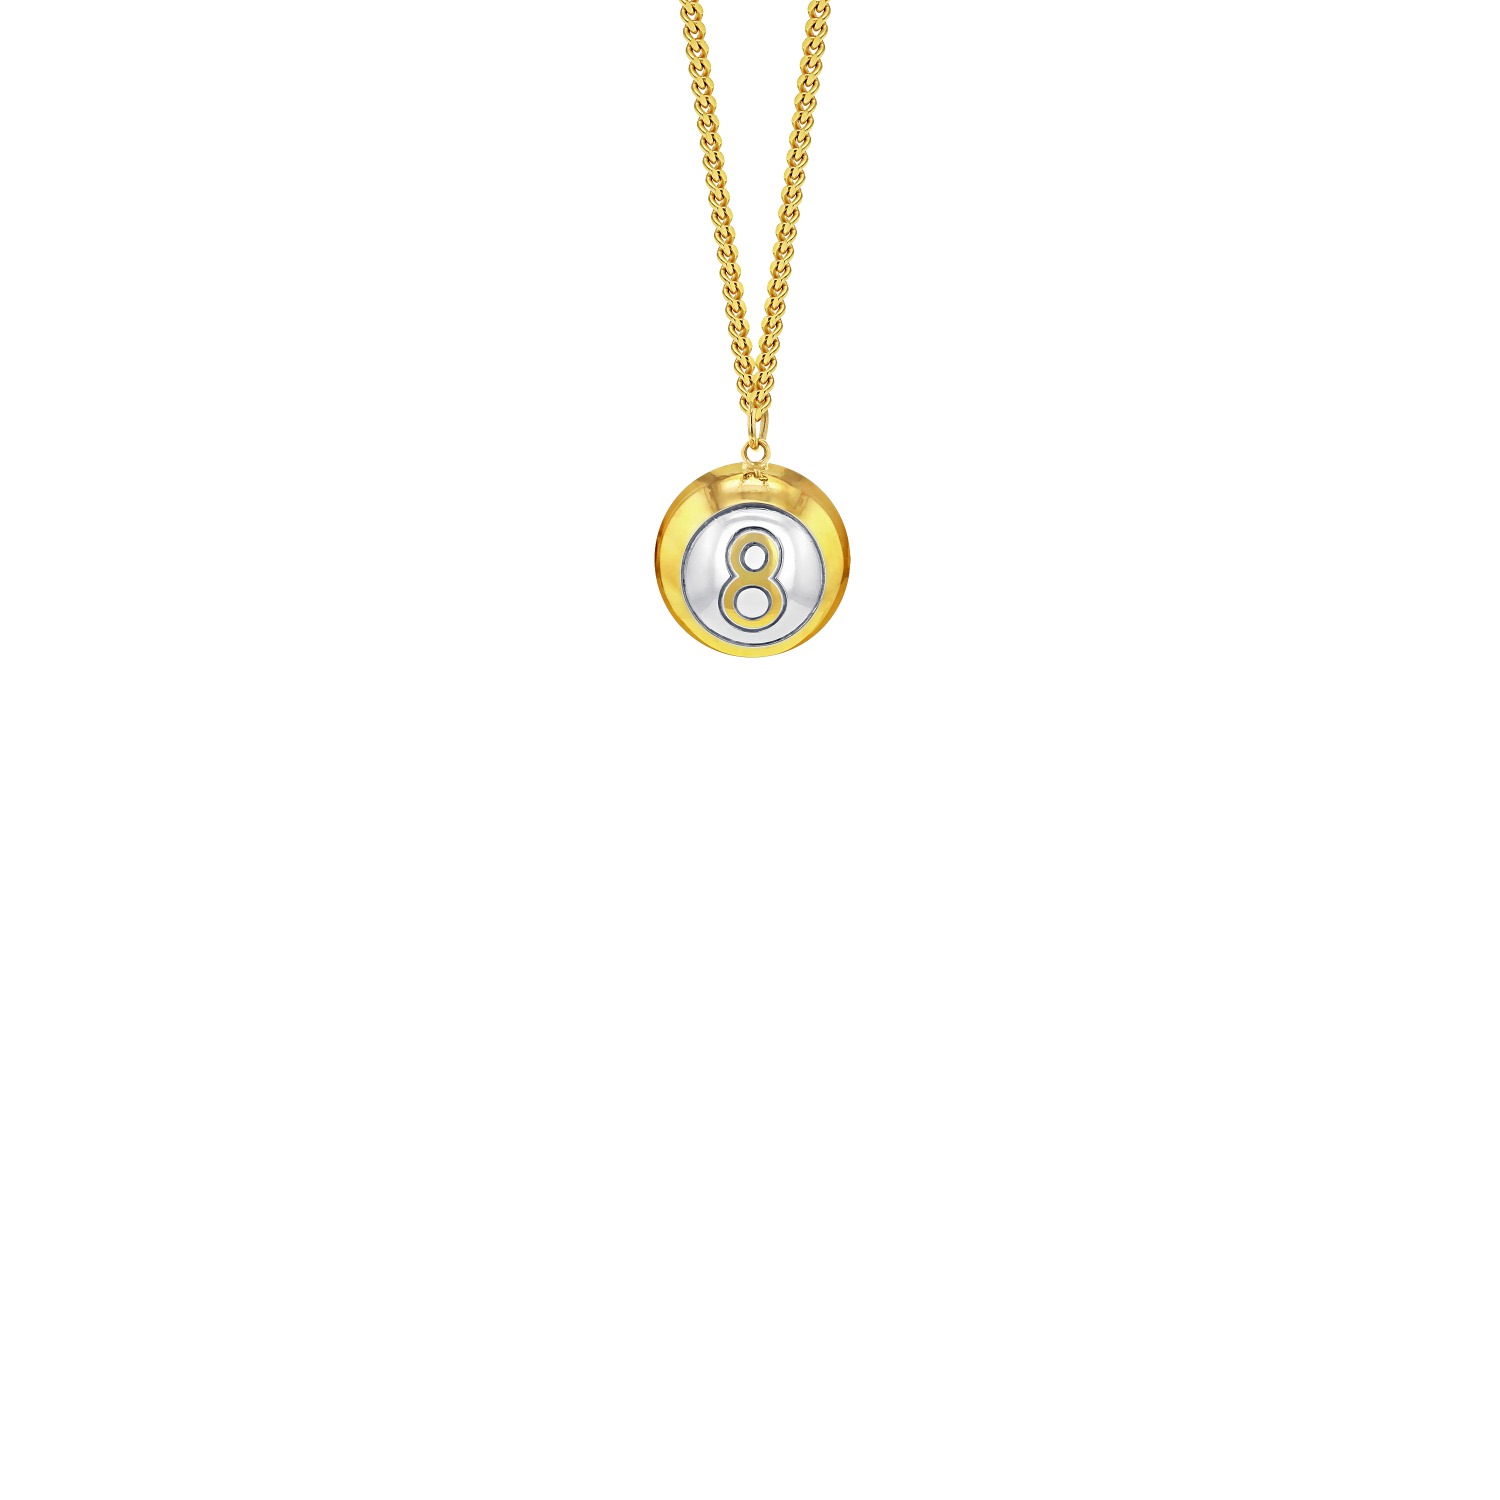 Men's 8 Ball Mini Pendant 2Tone 18Kt Gold-Plate With Sterling Silver Detail True Rocks